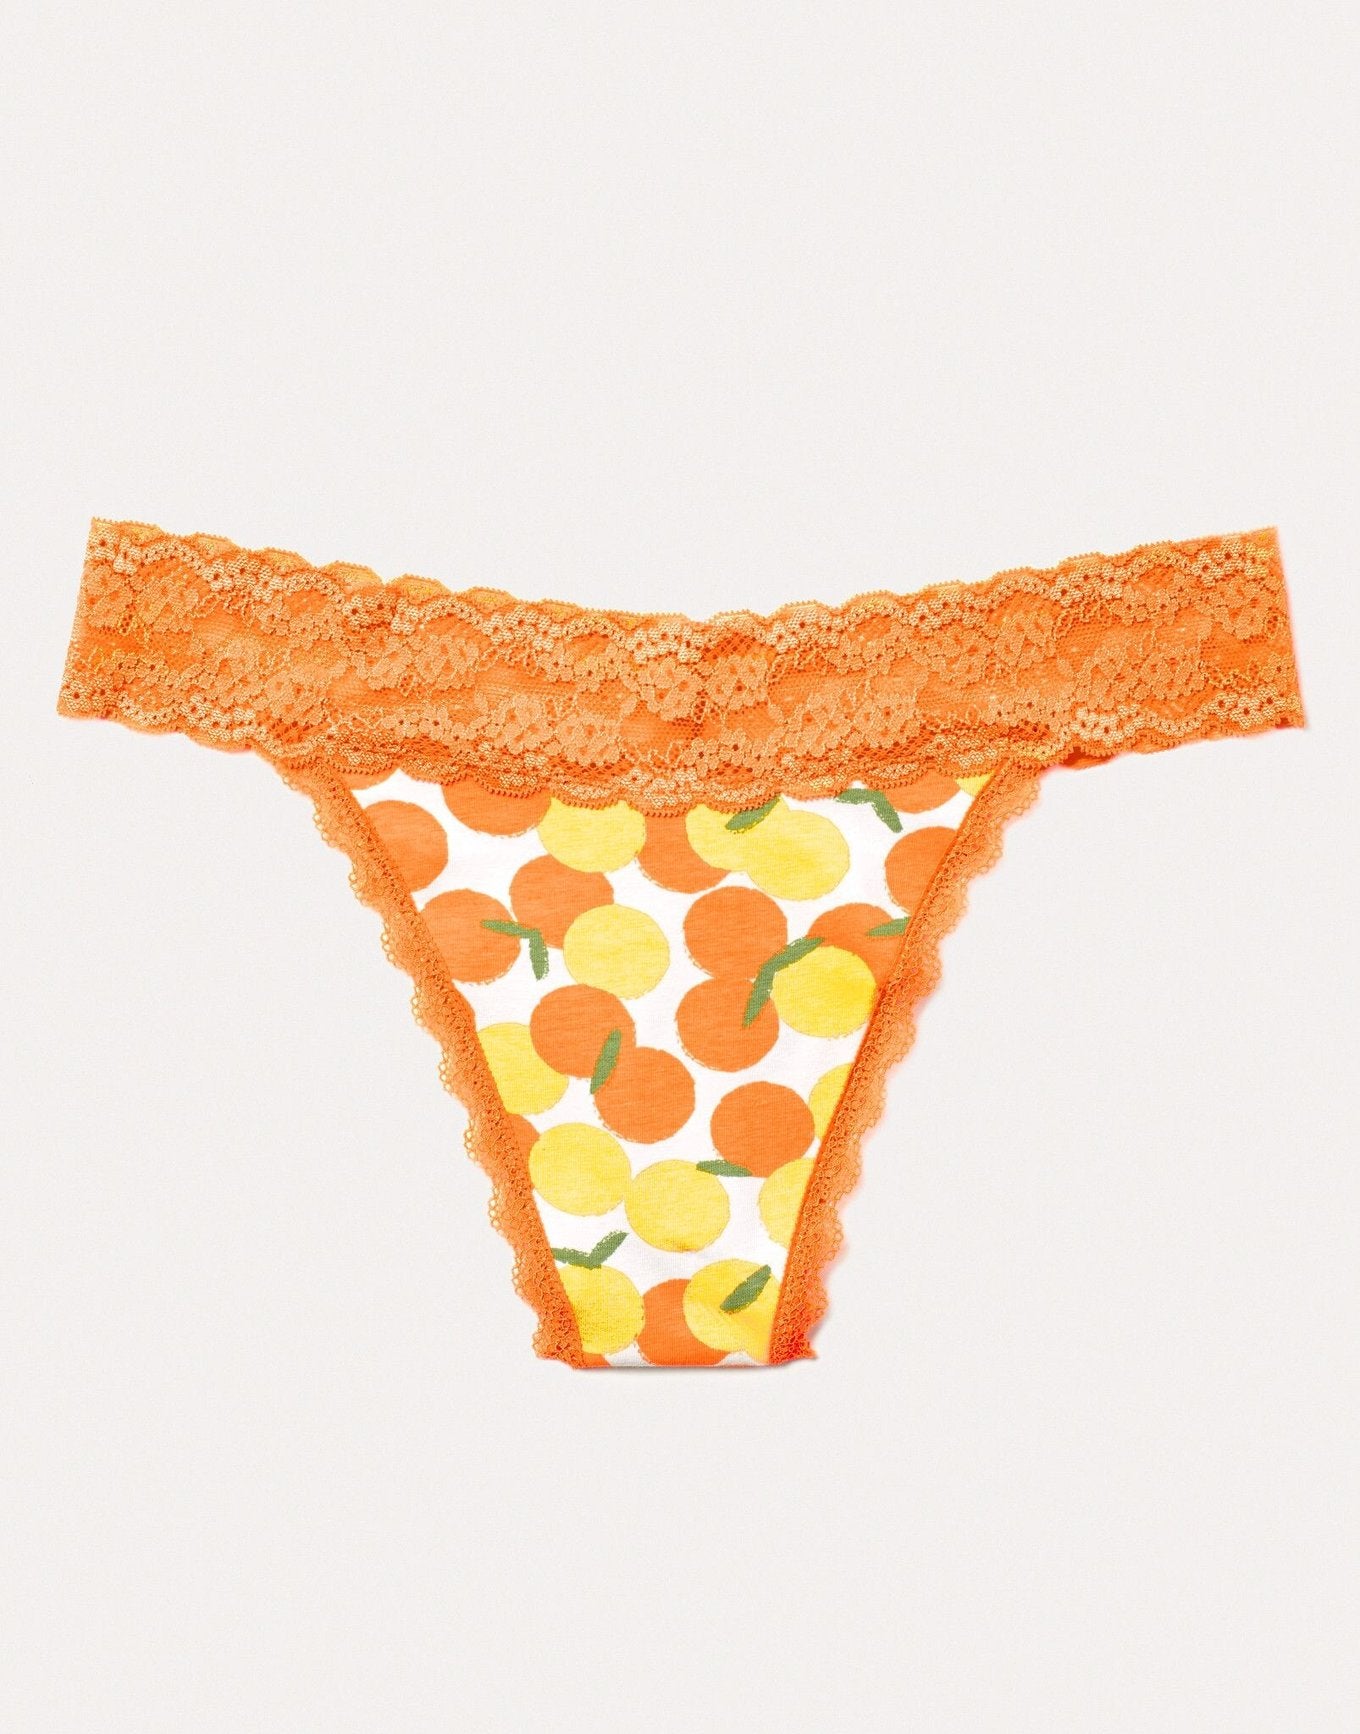 Lily period-proof panty Zest of Life